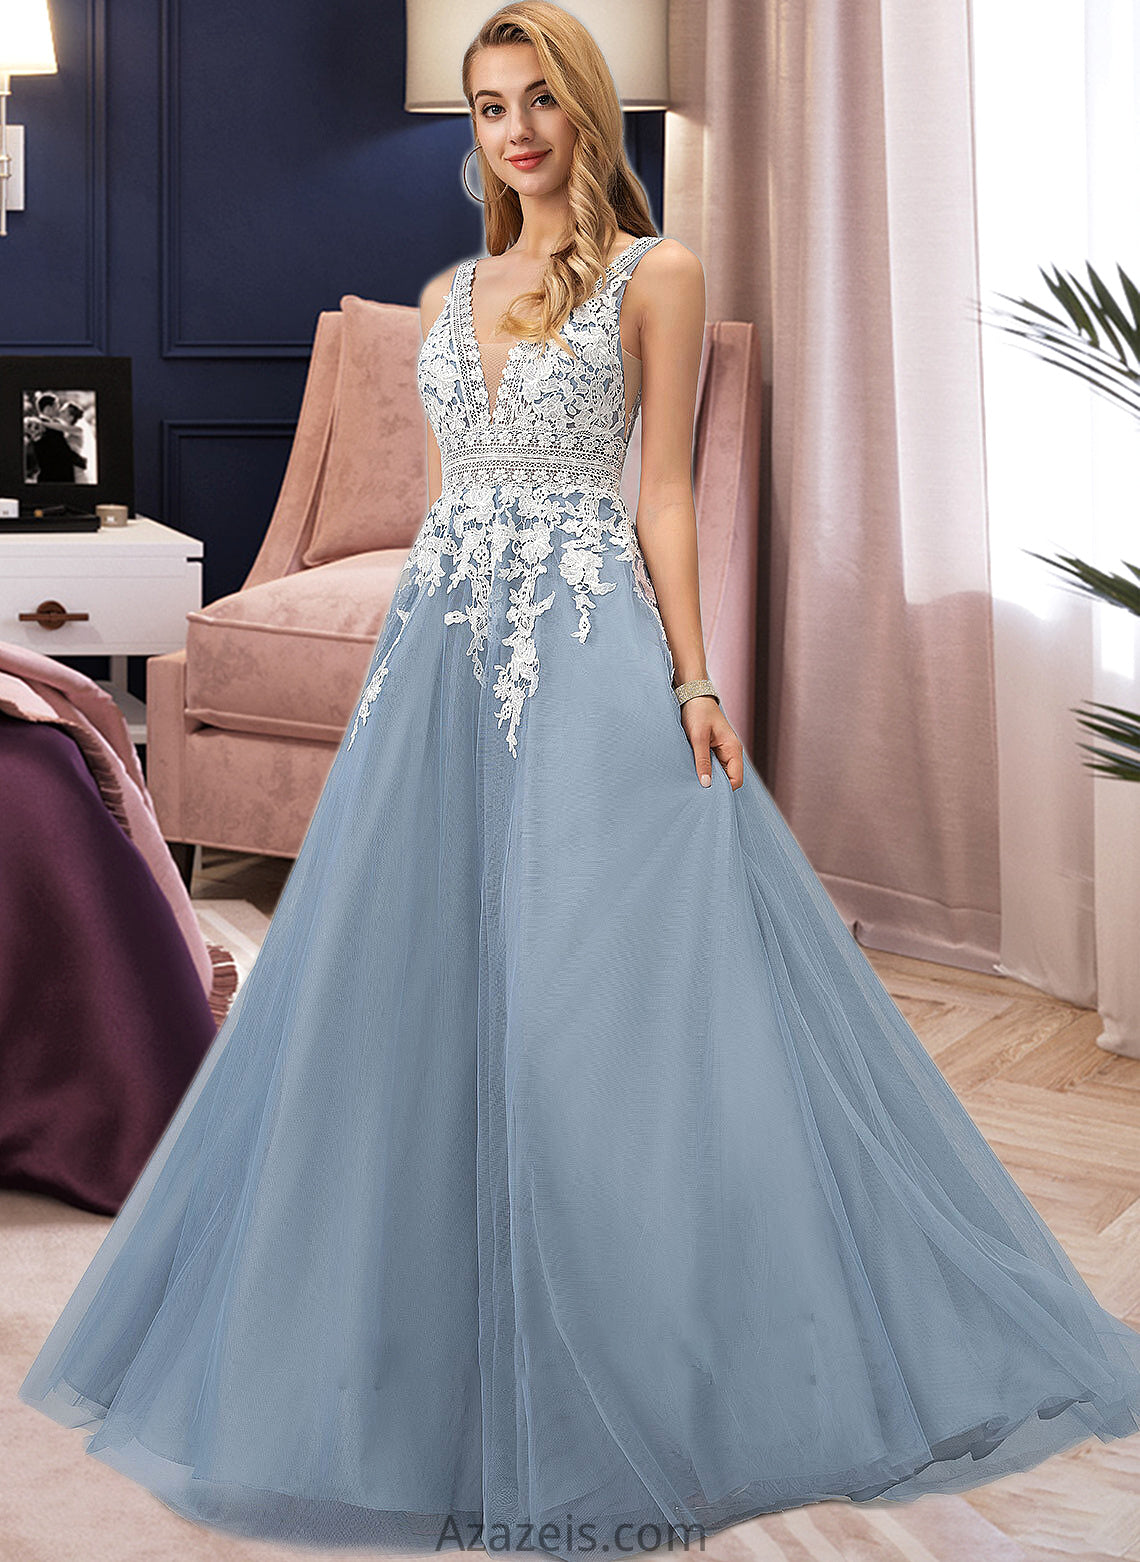 Karlee Ball-Gown/Princess V-neck Floor-Length Tulle Wedding Dress With Lace DFP0013763